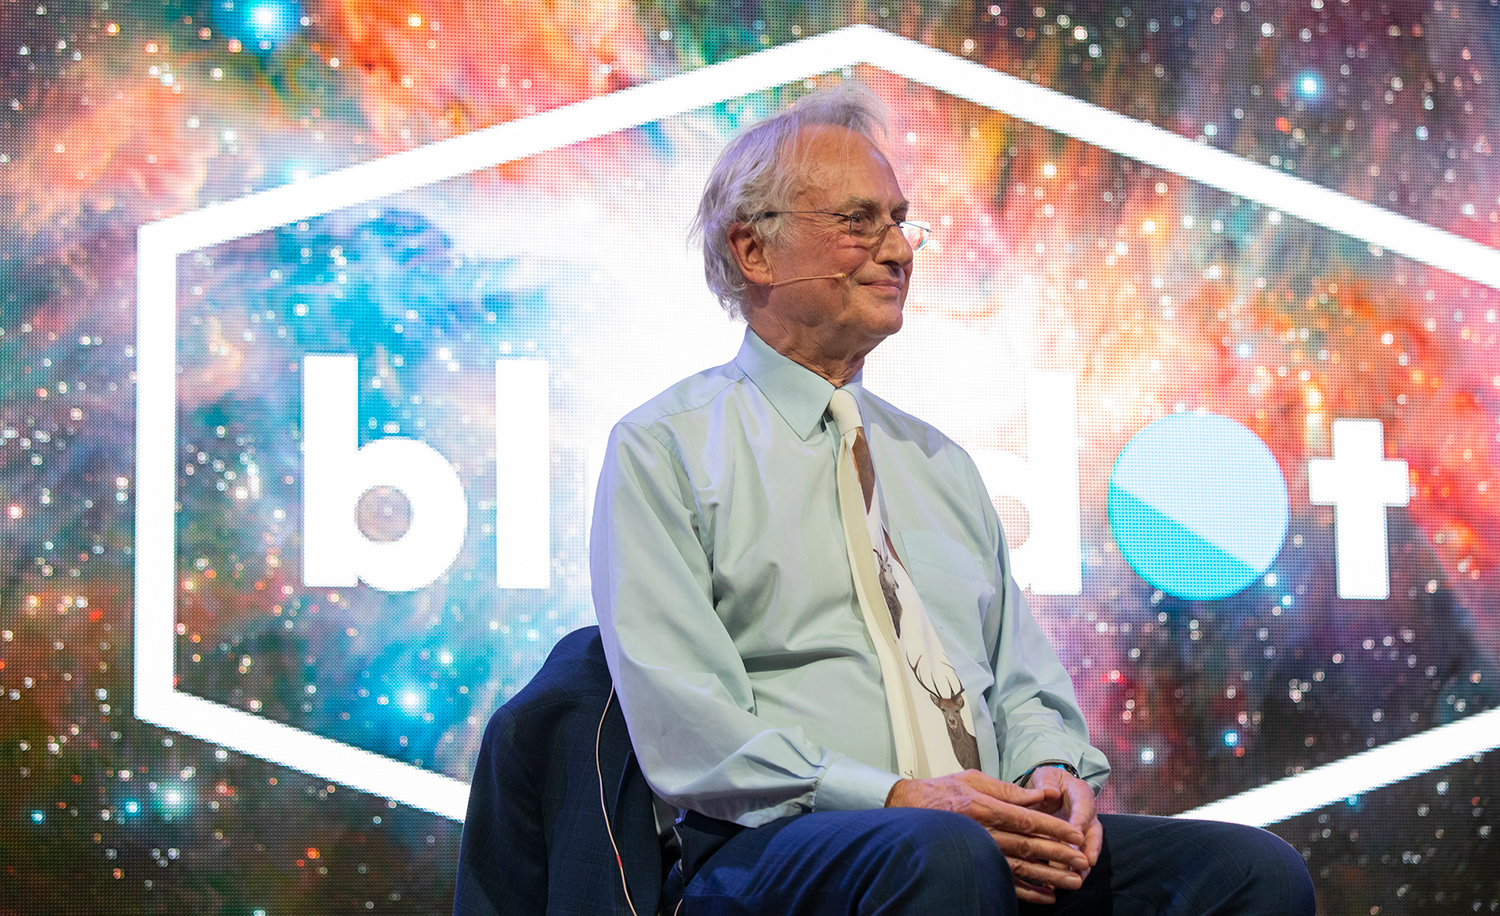 Richard Dawkins in conversation at the Blue Dot Festival on July 21, 2018 in Manchester, England. Andrew Benge/Getty Images.
